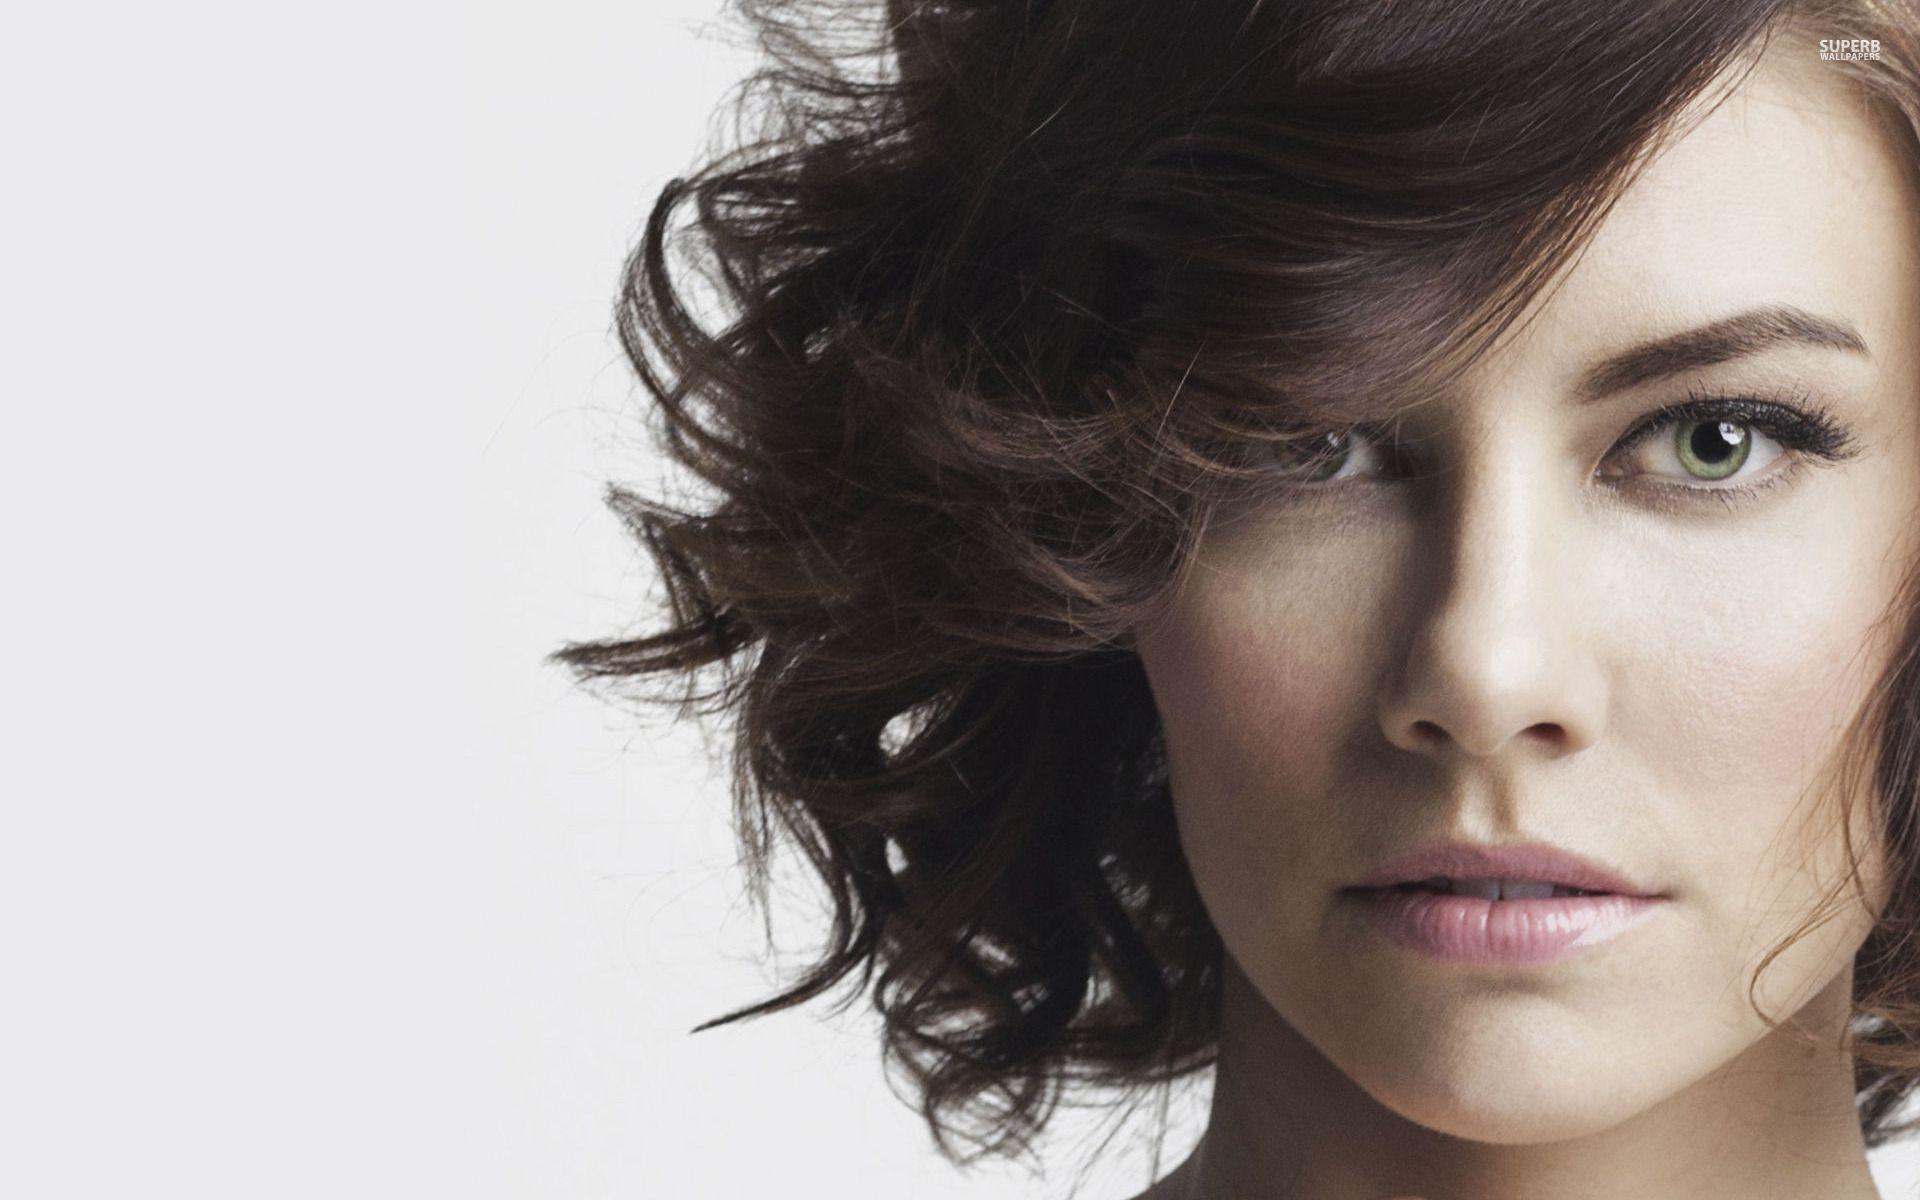 Lauren Cohan Wallpaper High Resolution and Quality Download